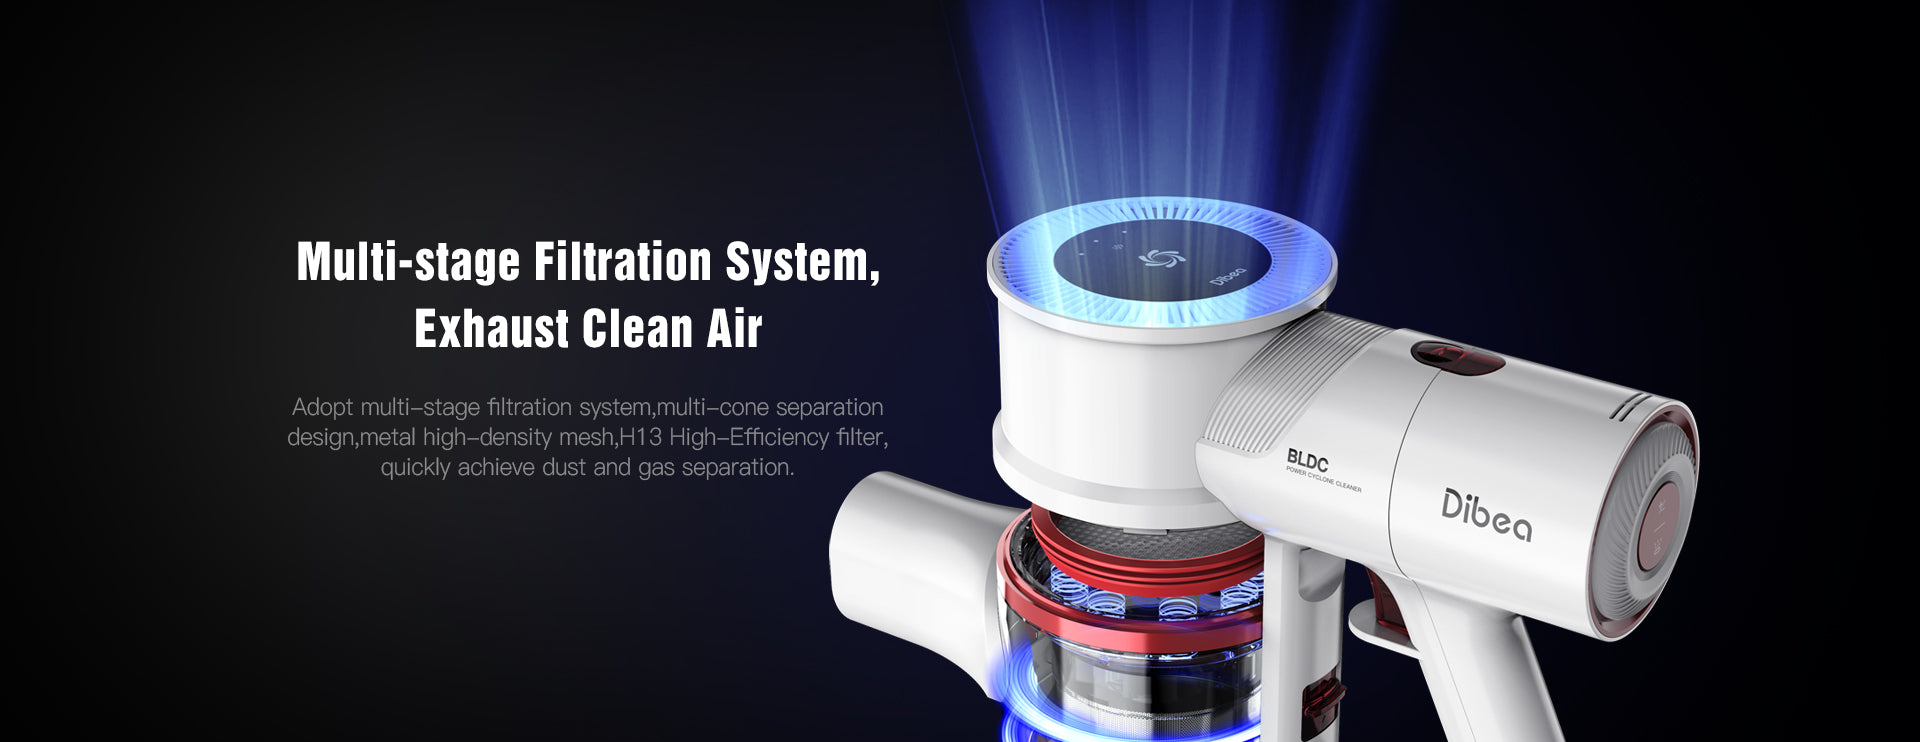 Multi-stage_Filtration_System_Exhaust_Clean_Air